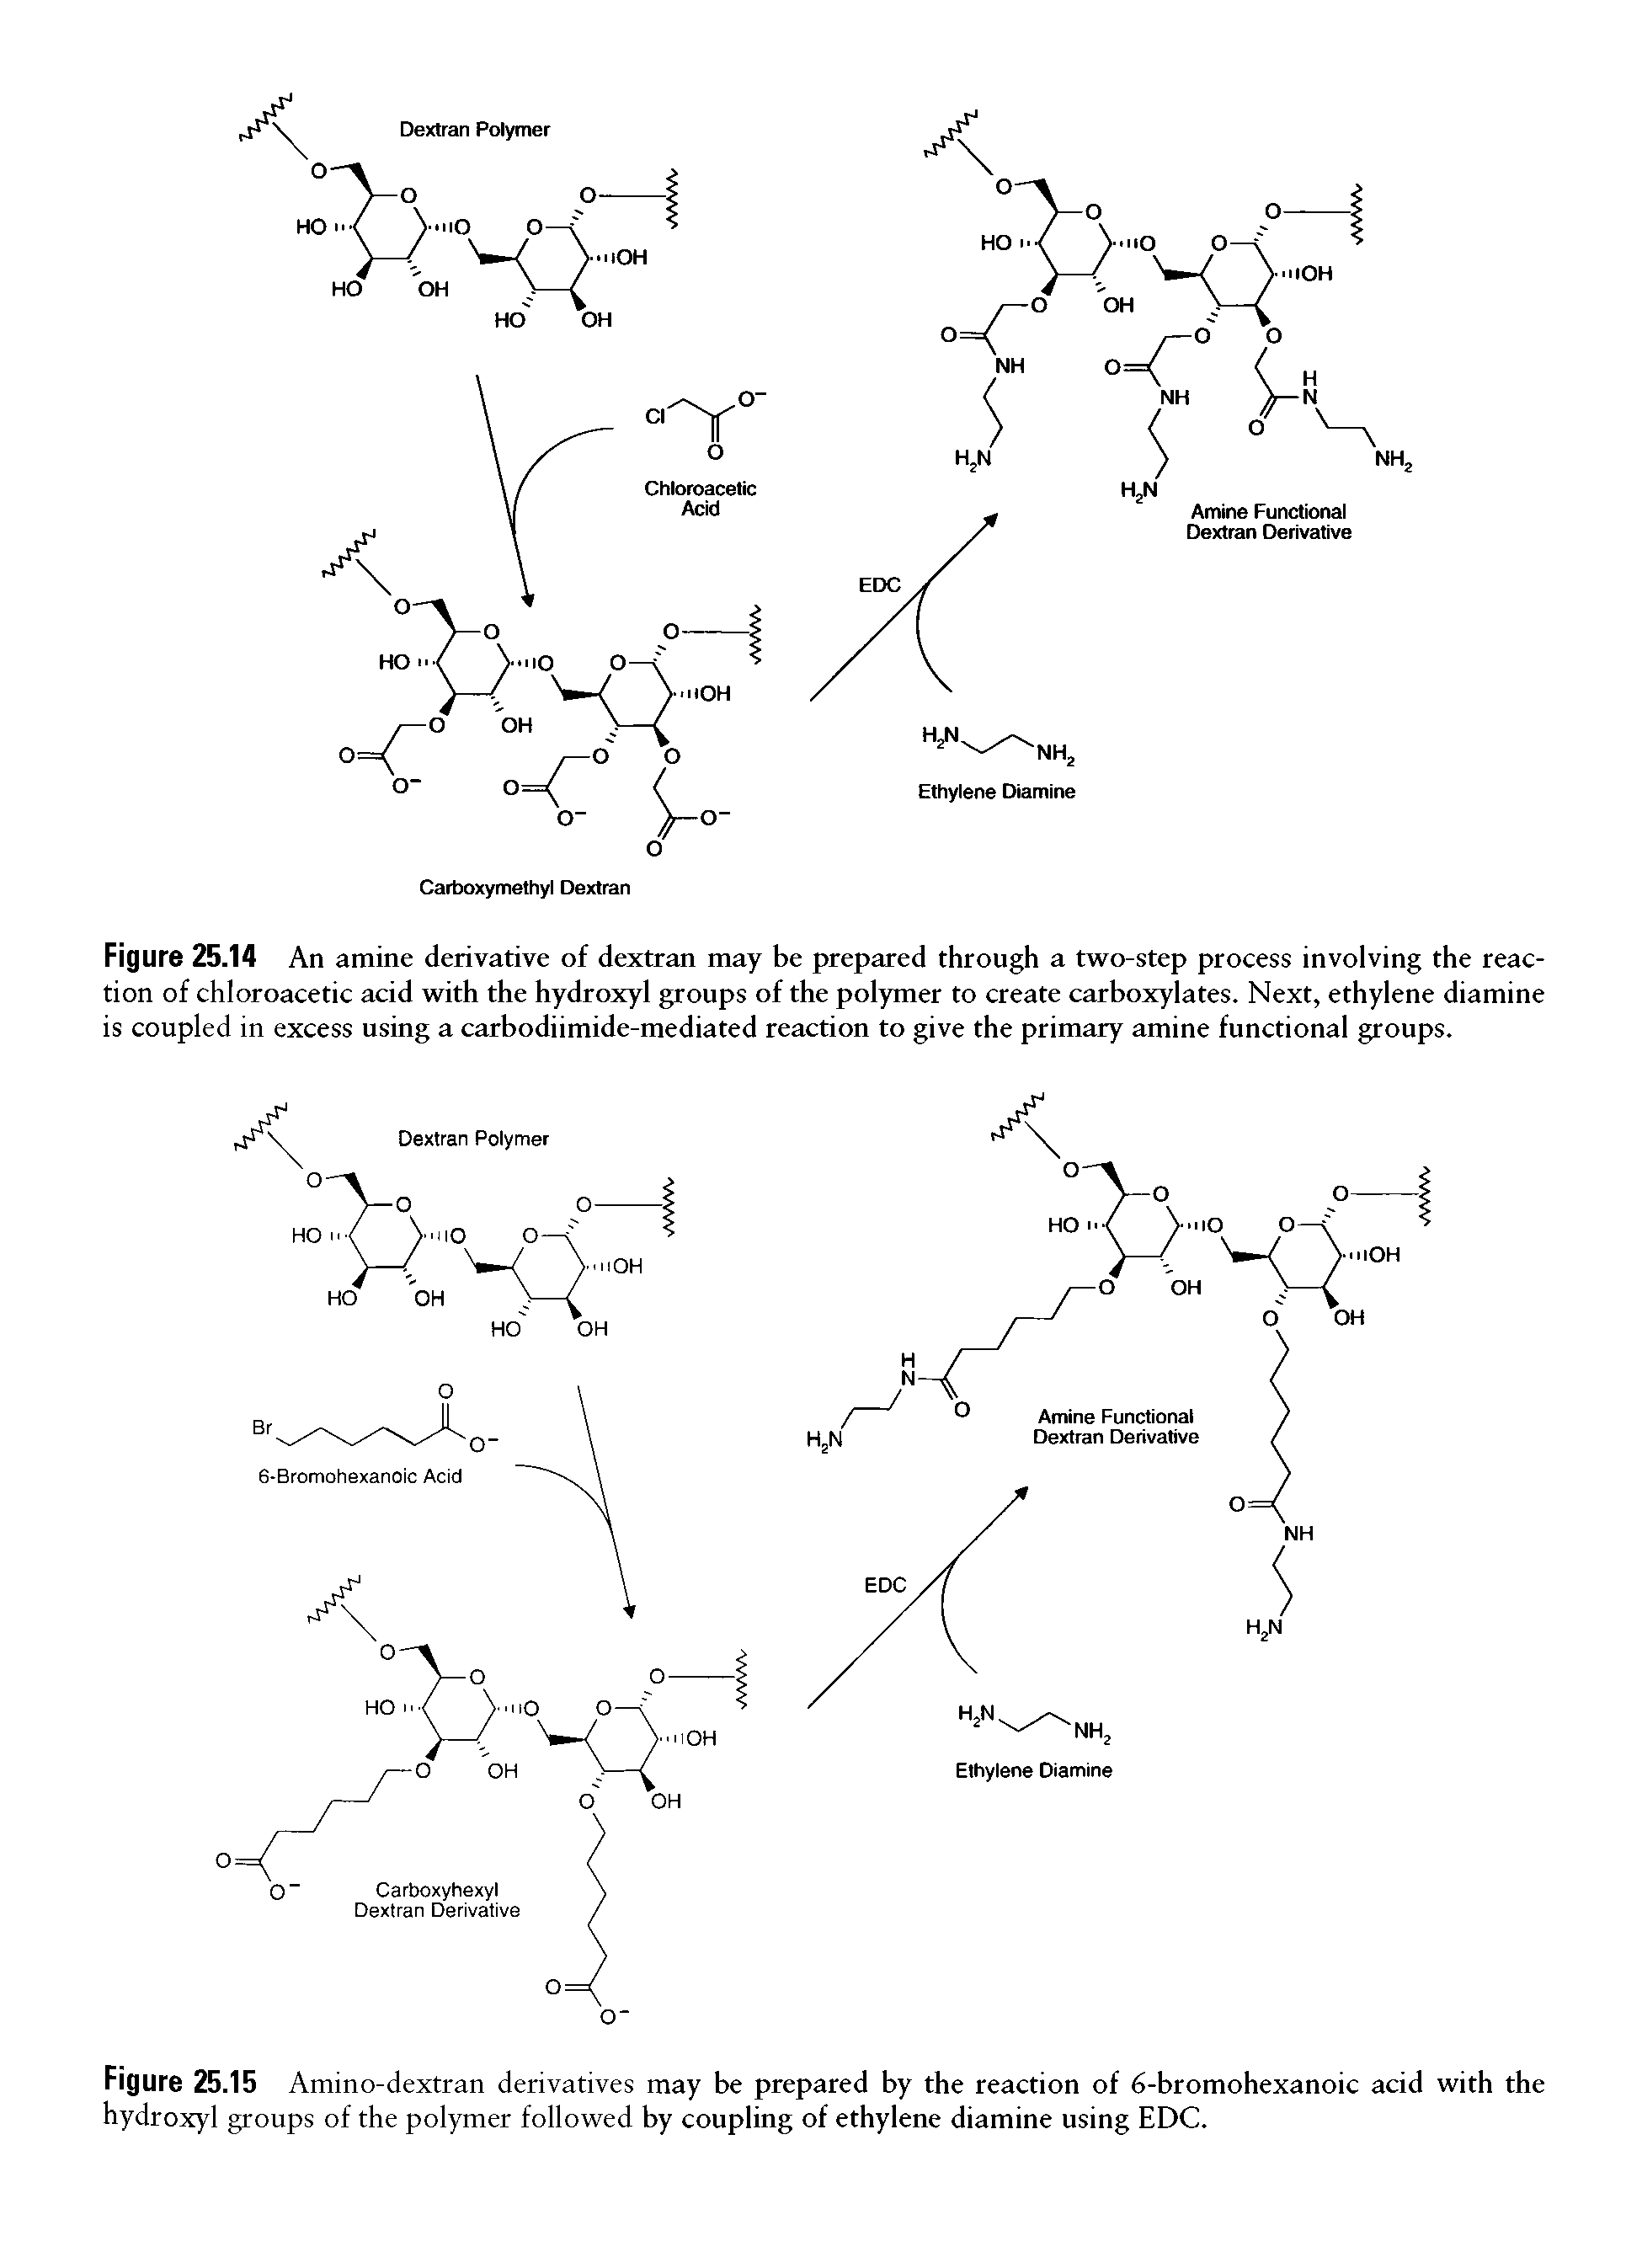 Figure 25.14 An amine derivative of dextran may be prepared through a two-step process involving the reac-tion of chloroacetic acid with the hydroxyl groups of the polymer to create carboxylates. Next, ethylene diamine is coupled in excess using a carbodiimide-mediated reaction to give the primary amine functional groups.